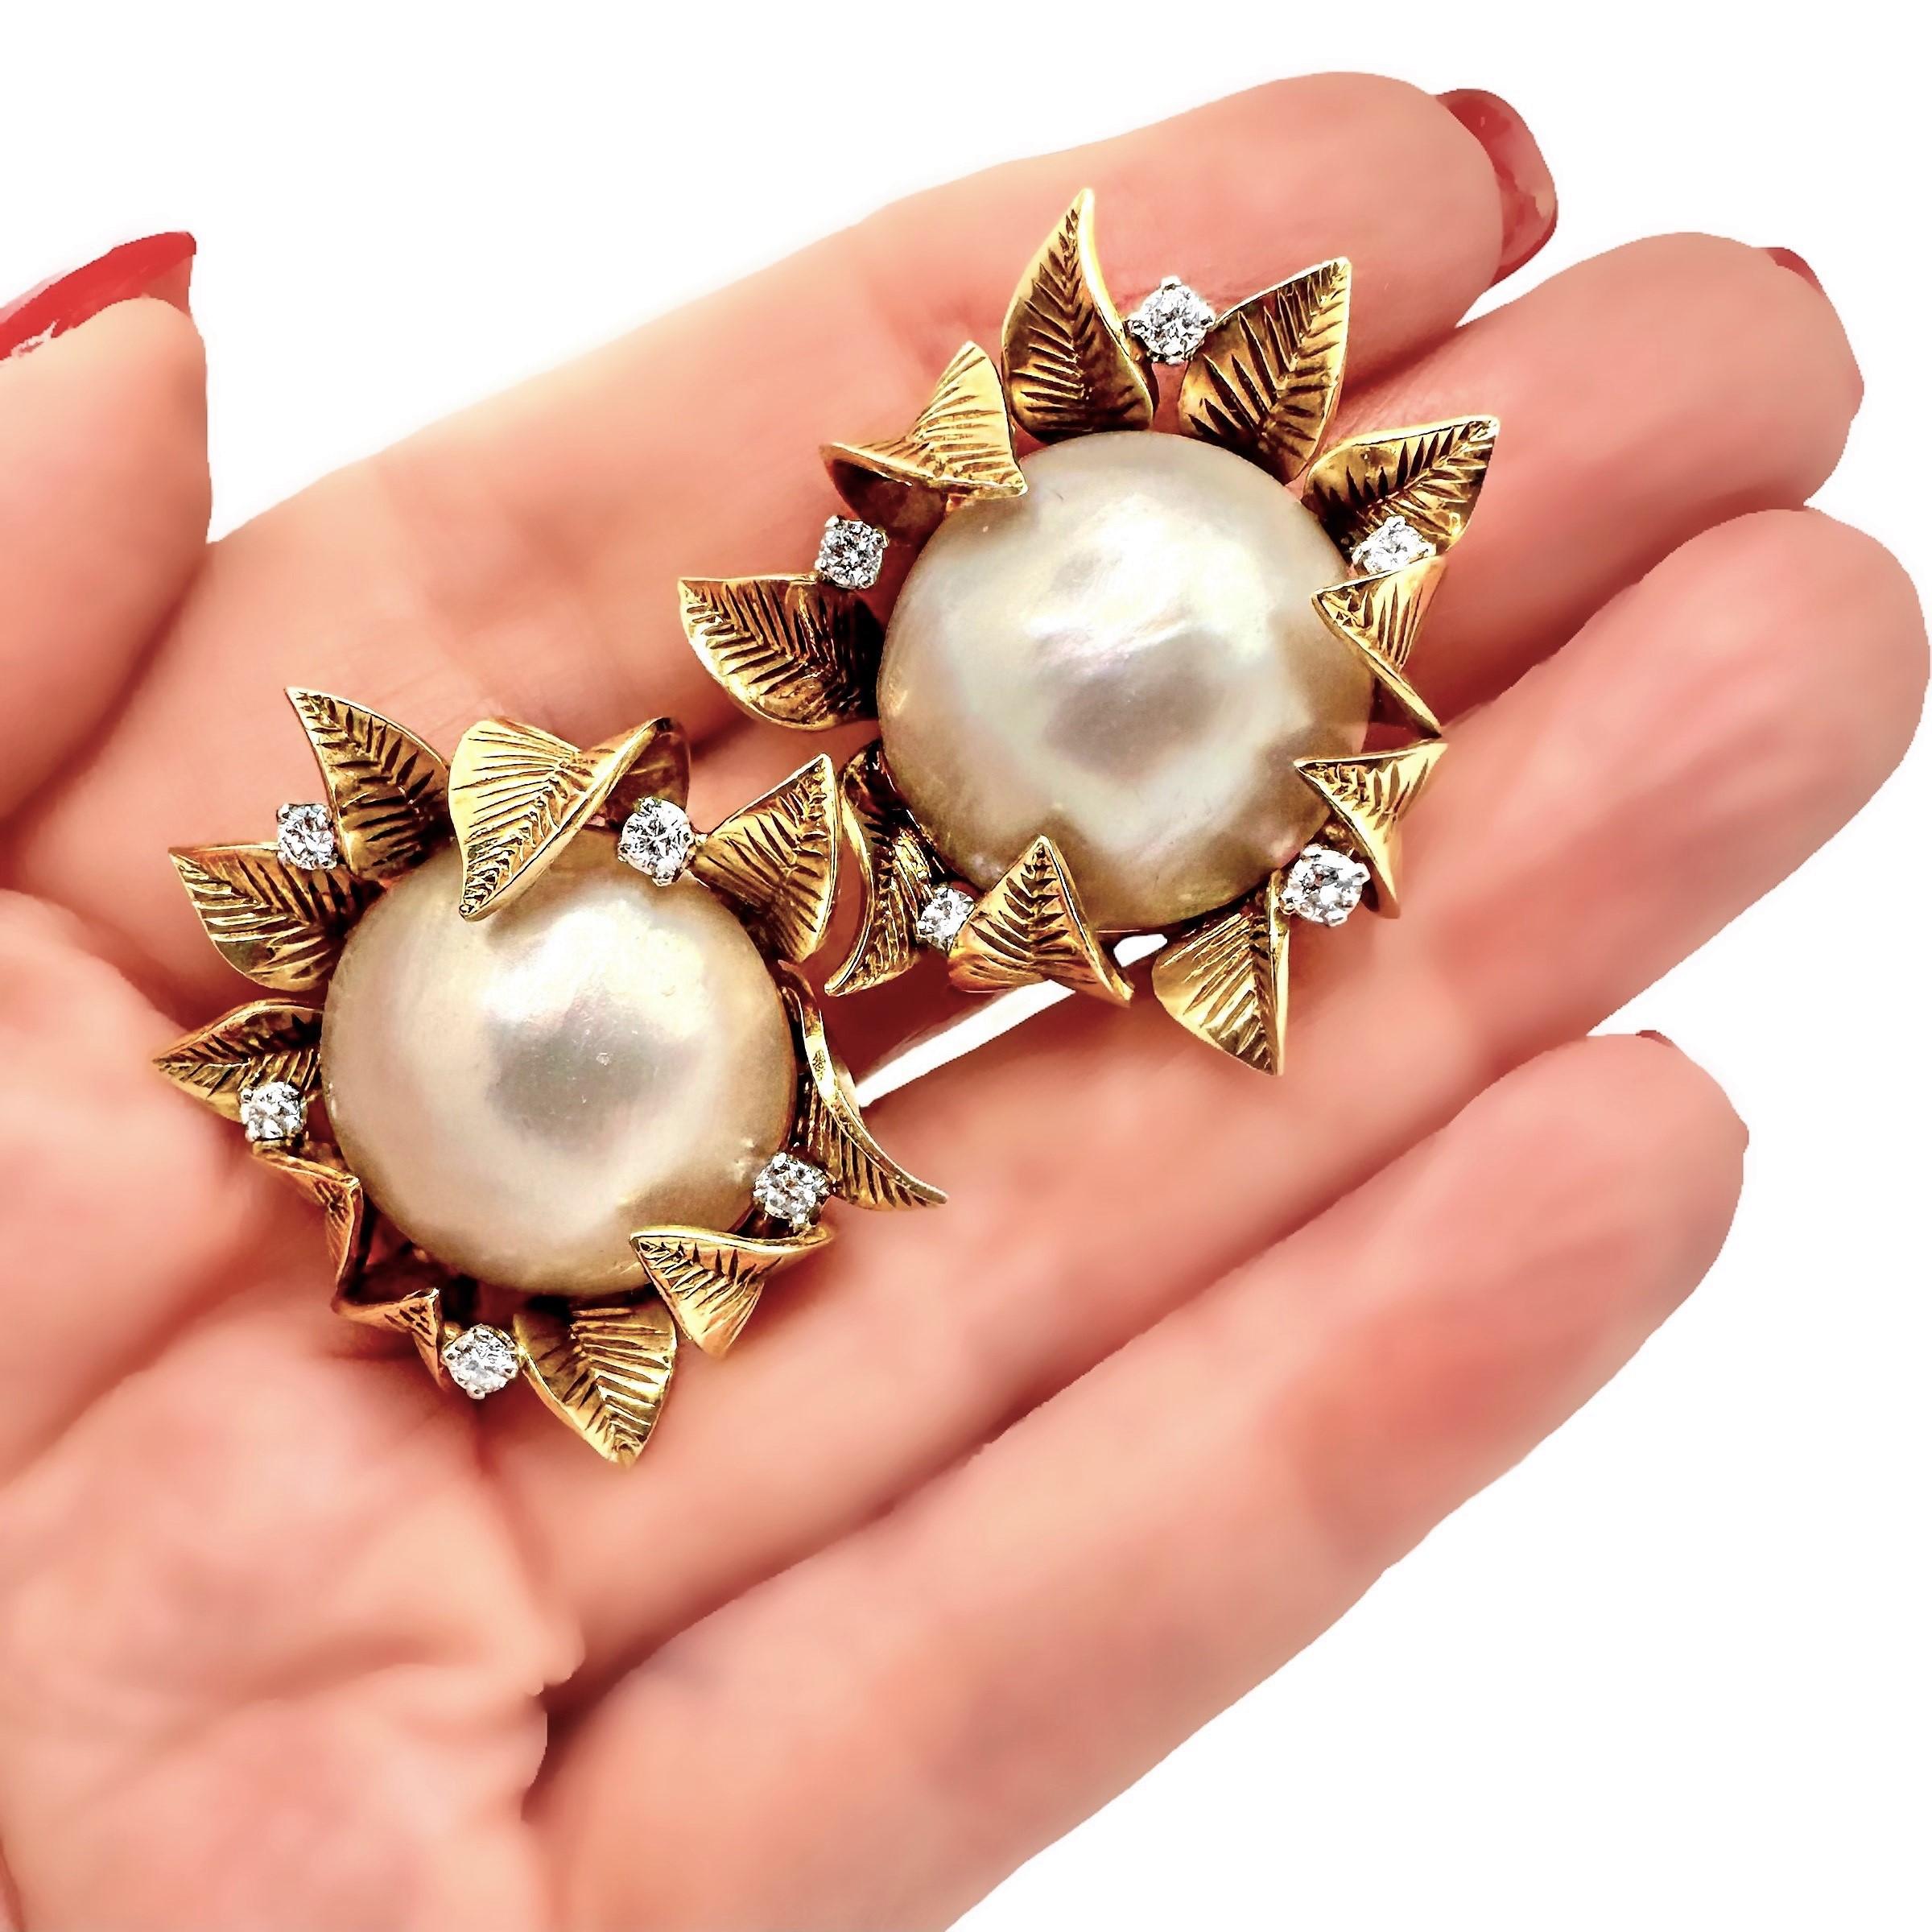 French 18K Gold Earrings with Mobe Pearls Surrounded by Leaves and Diamonds For Sale 8